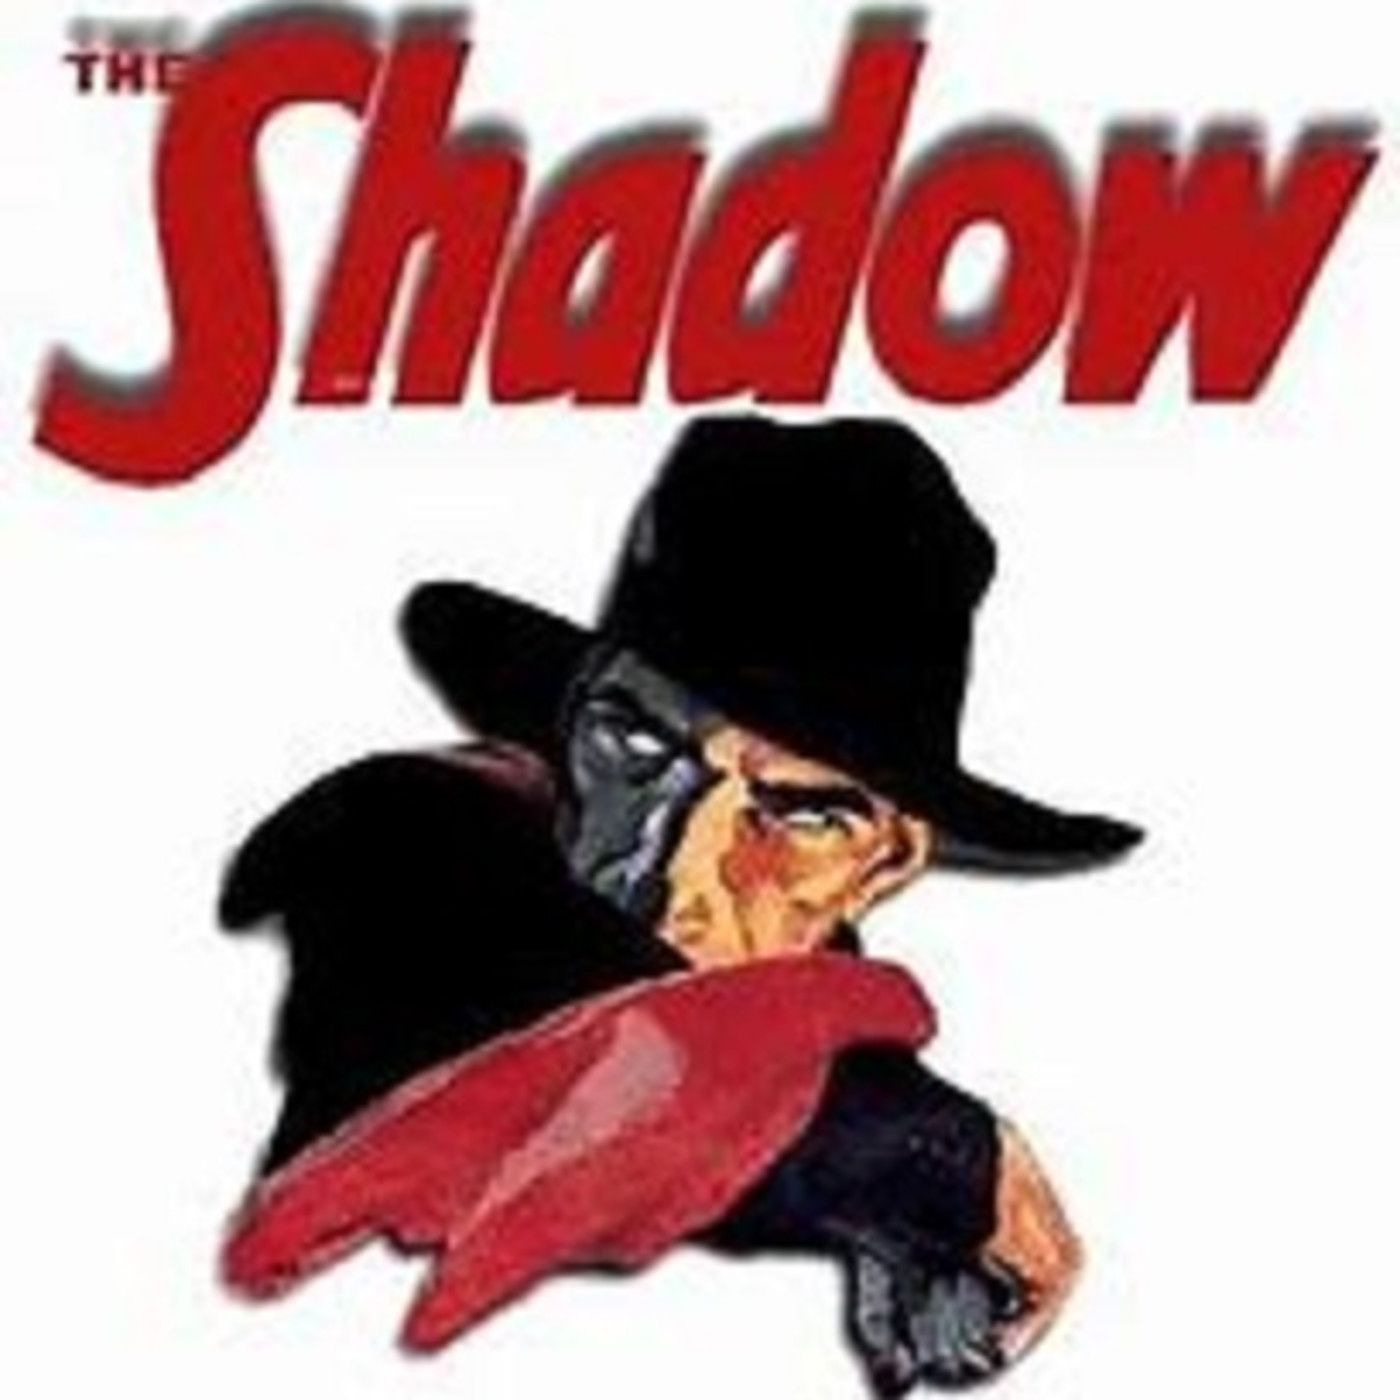 1946-0512 - The Bride Wore Black - 00 - The Shadow